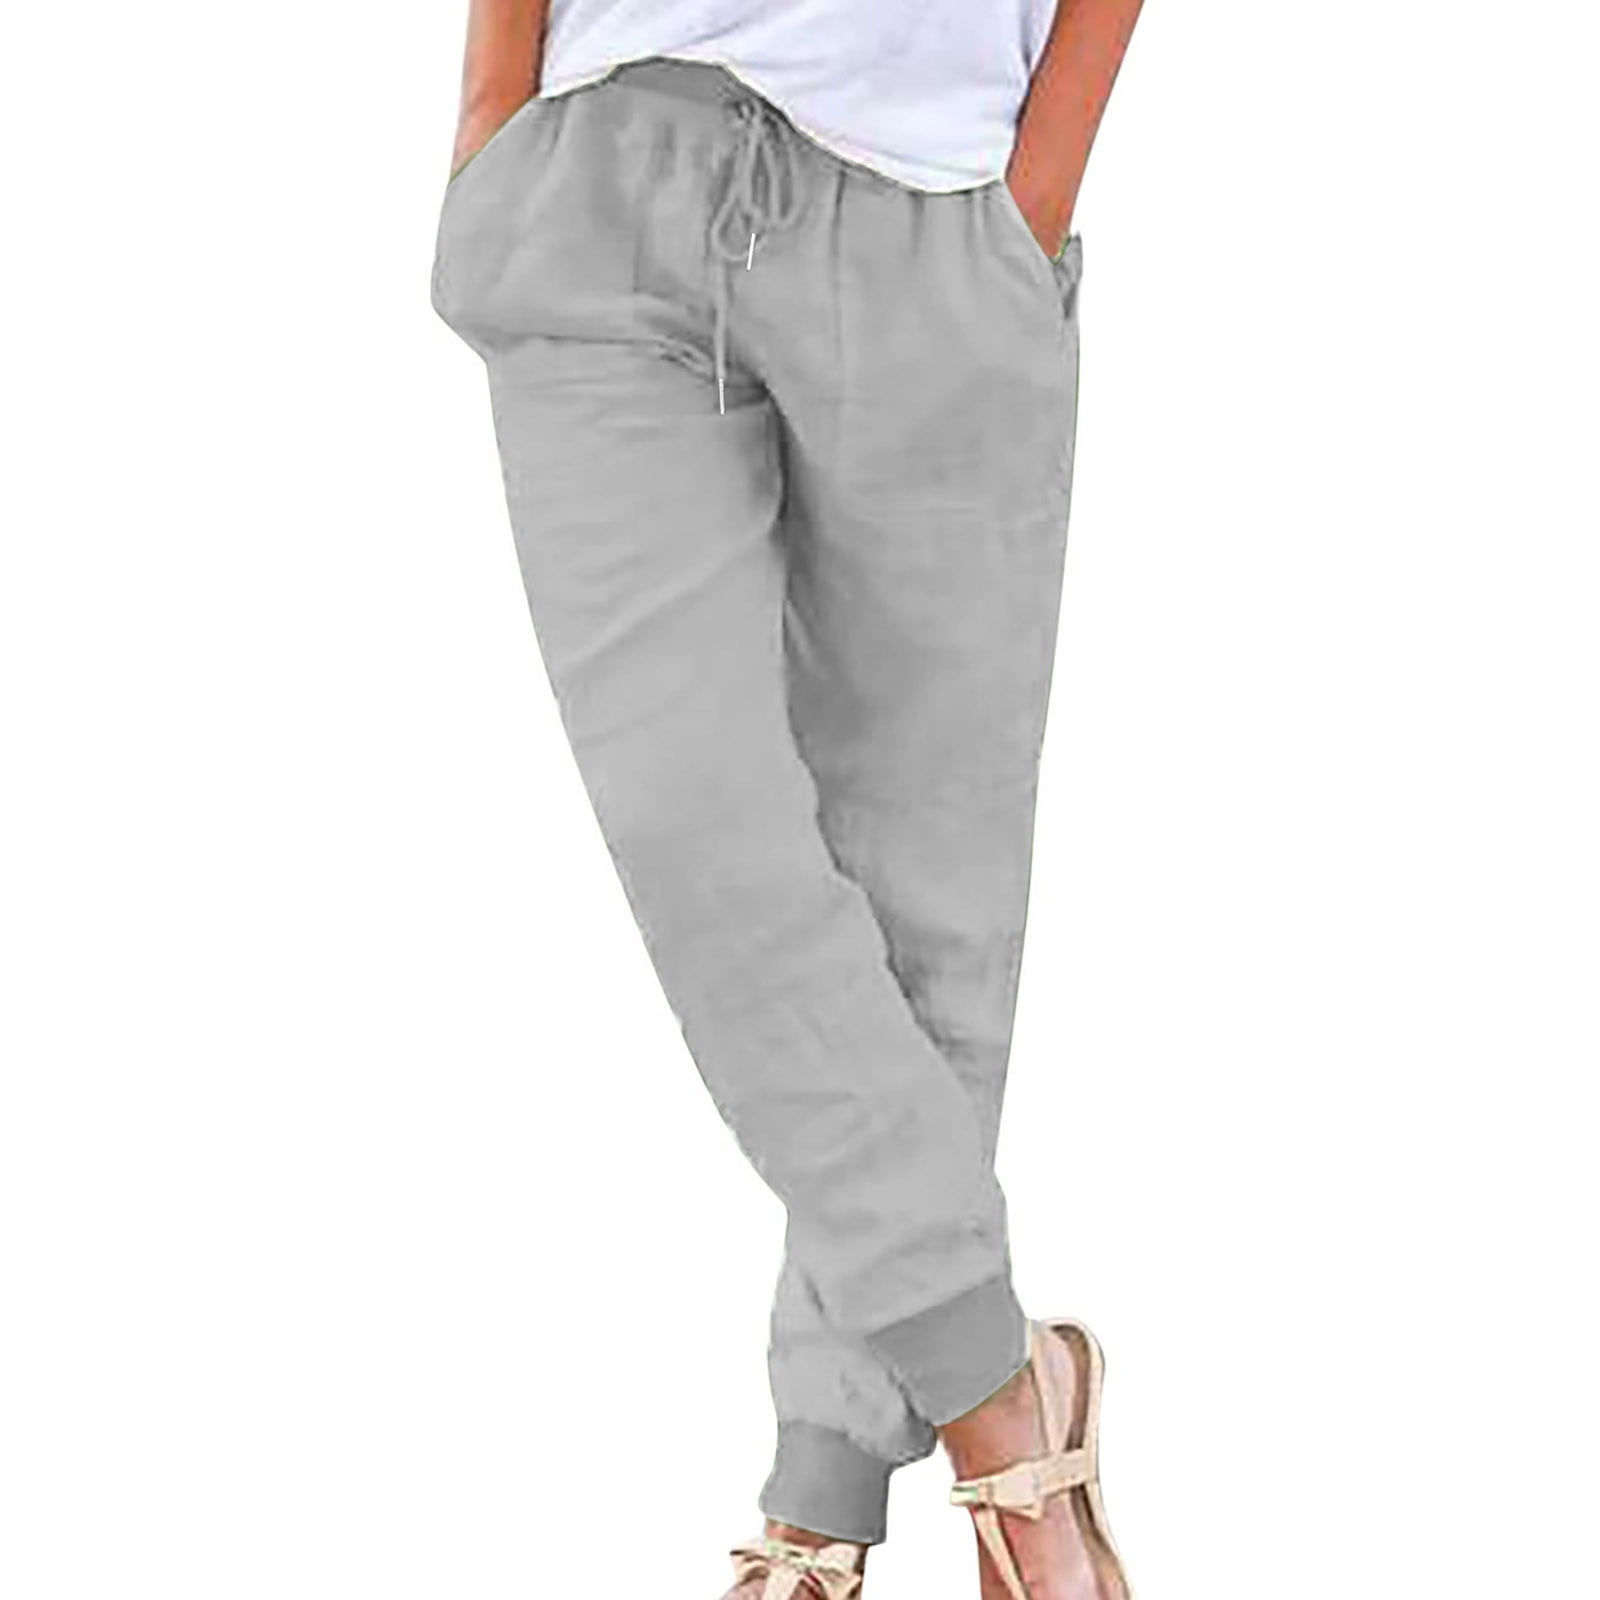 Cotton Linen Pants for Women Elastic Waist Drawstring Straight Leg Pants  Casual Soft Lounge Trousers with Pockets